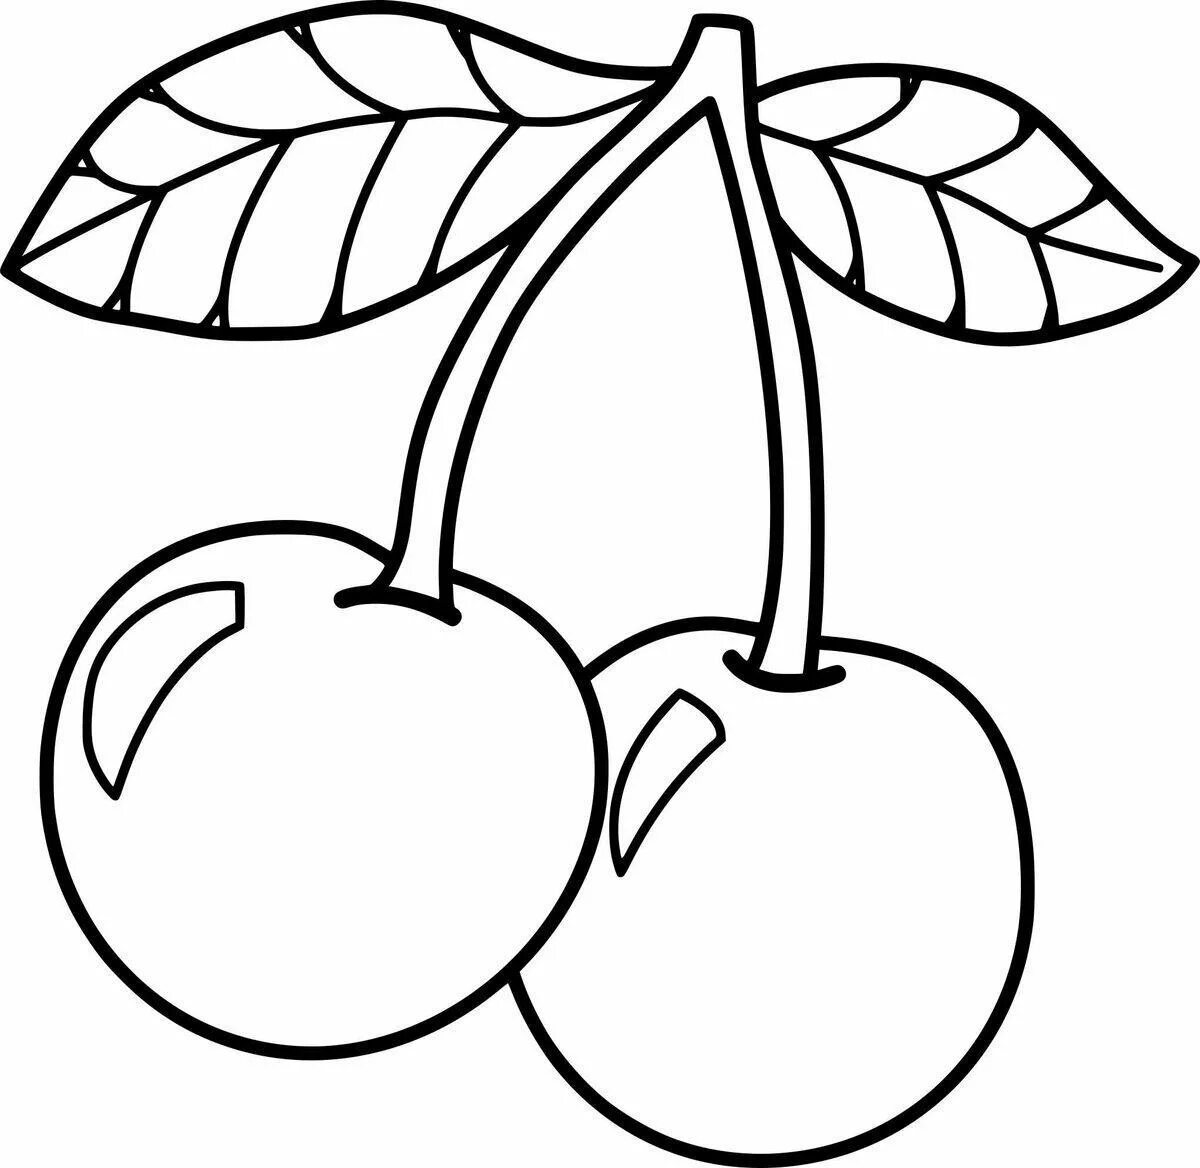 Fun berry coloring pages for 3-4 year olds